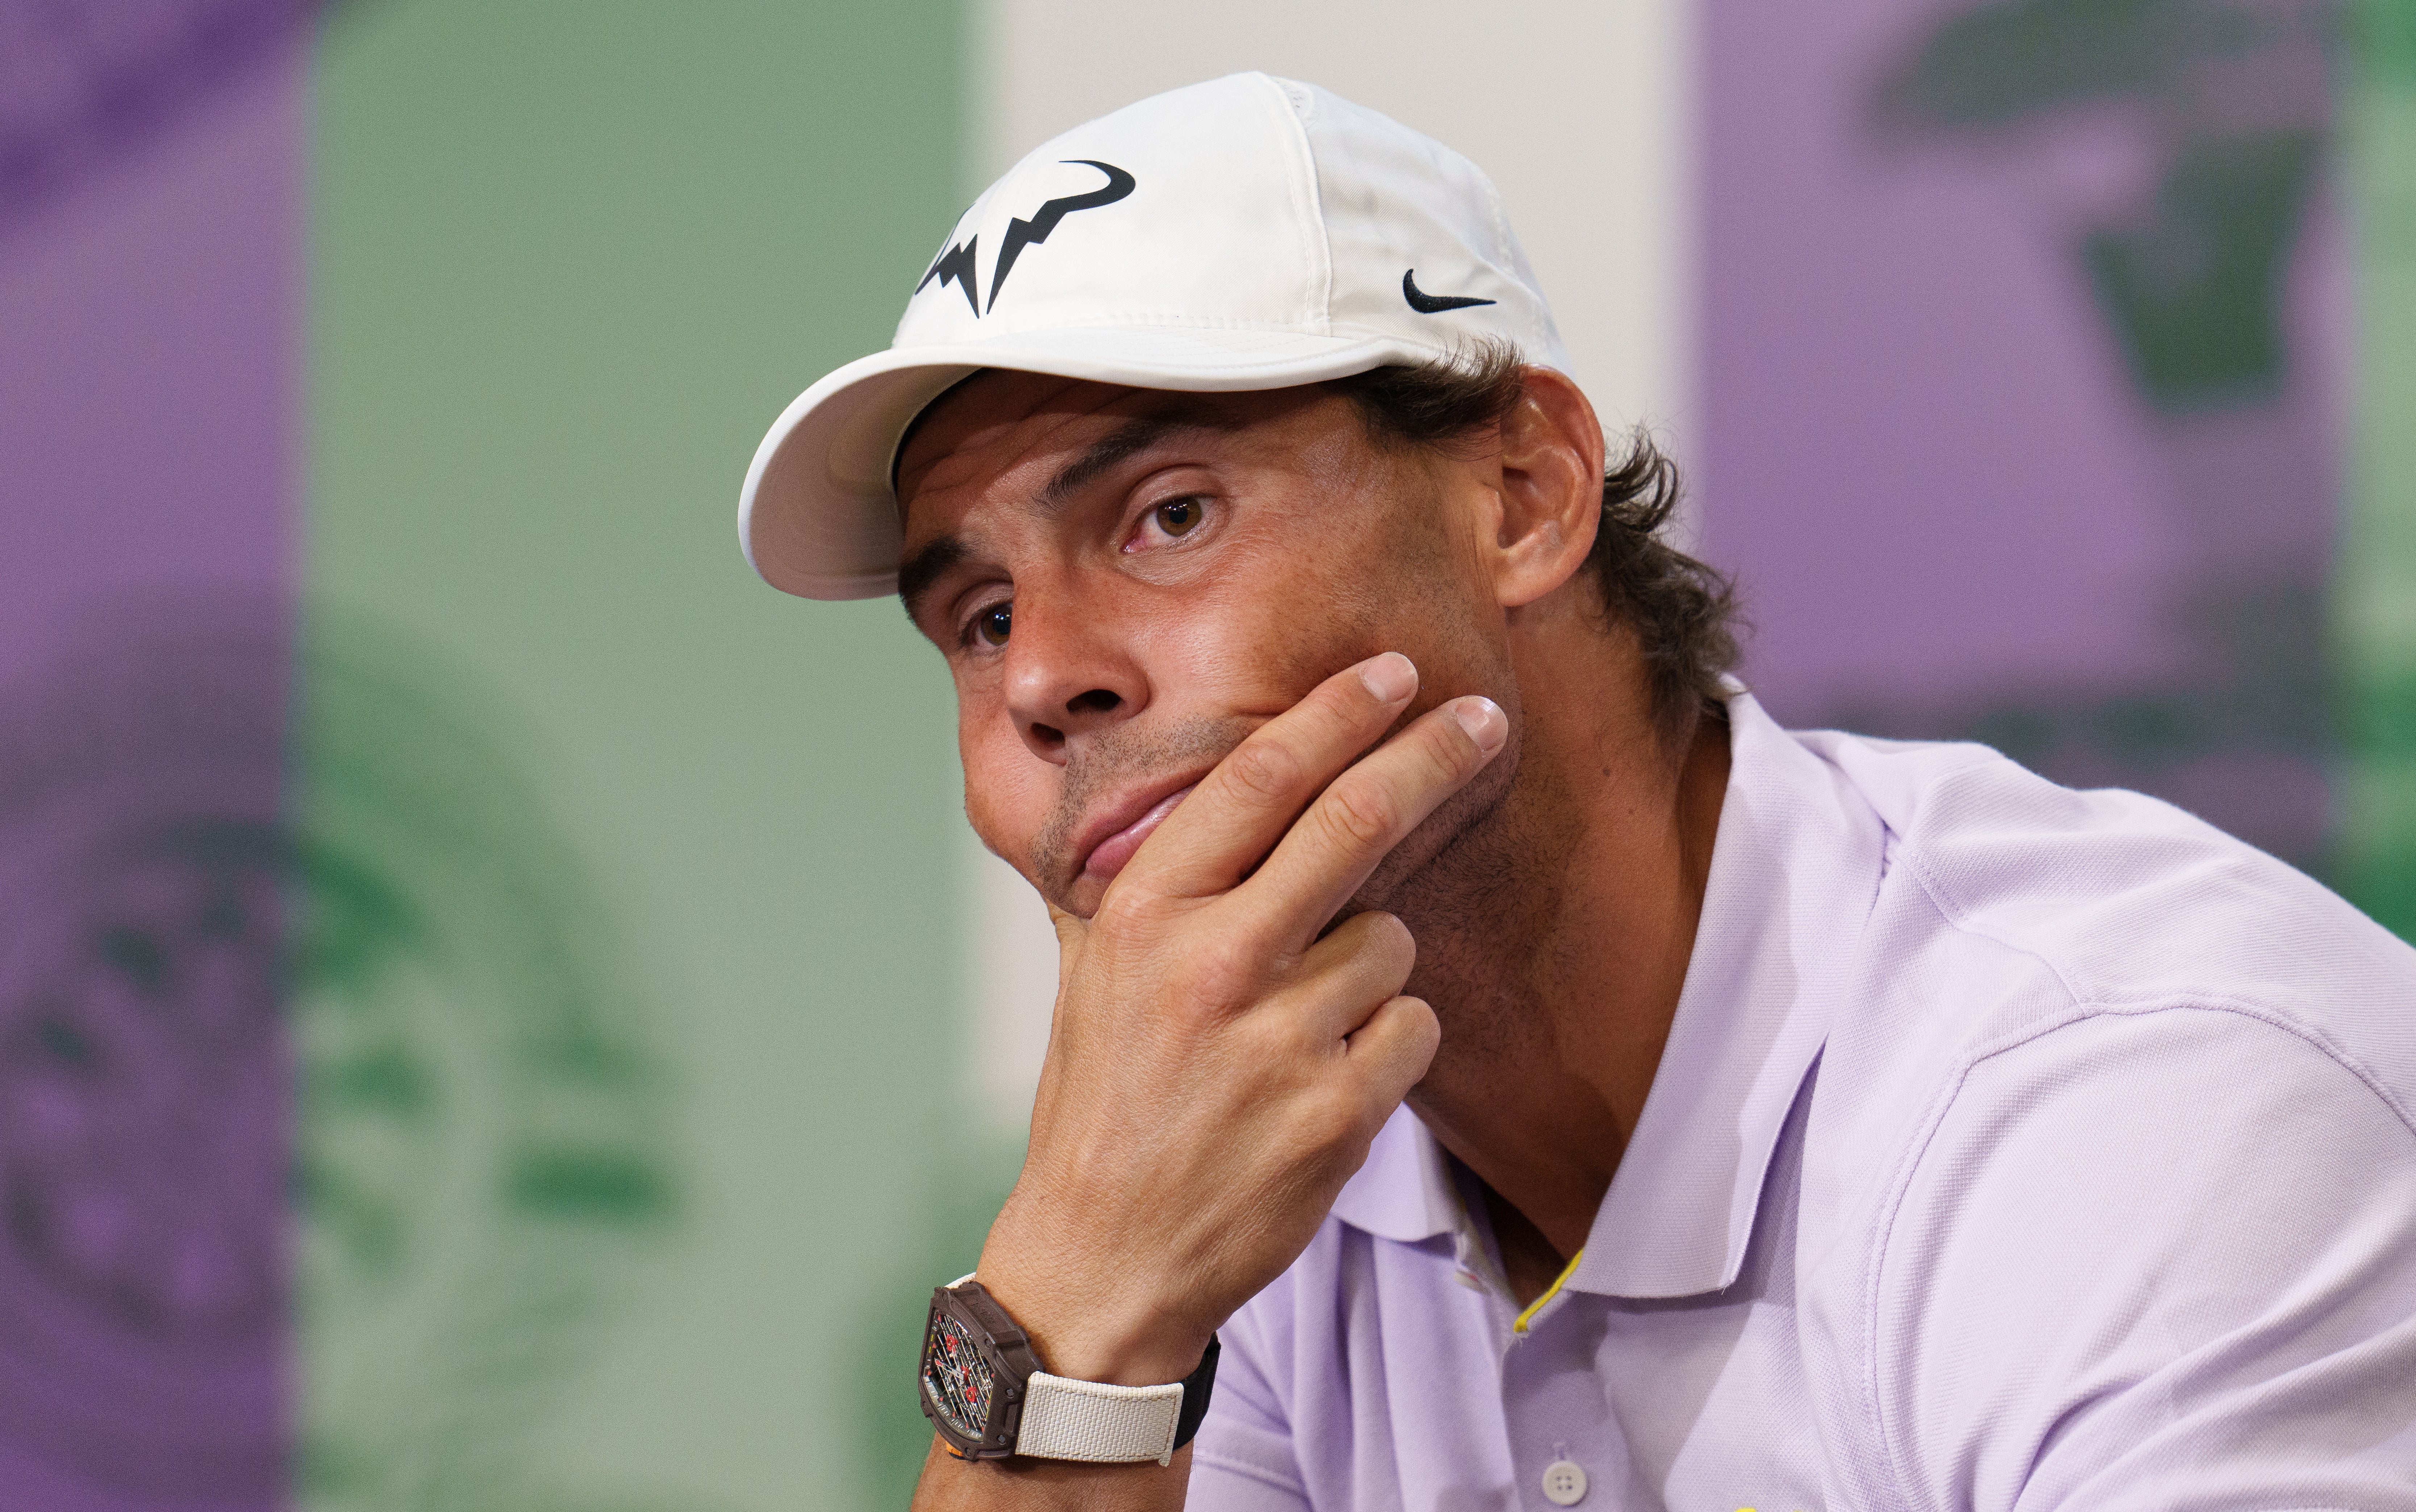 Fans devastated for true competitor Nadal as he pulls out of Wimbledon The Independent